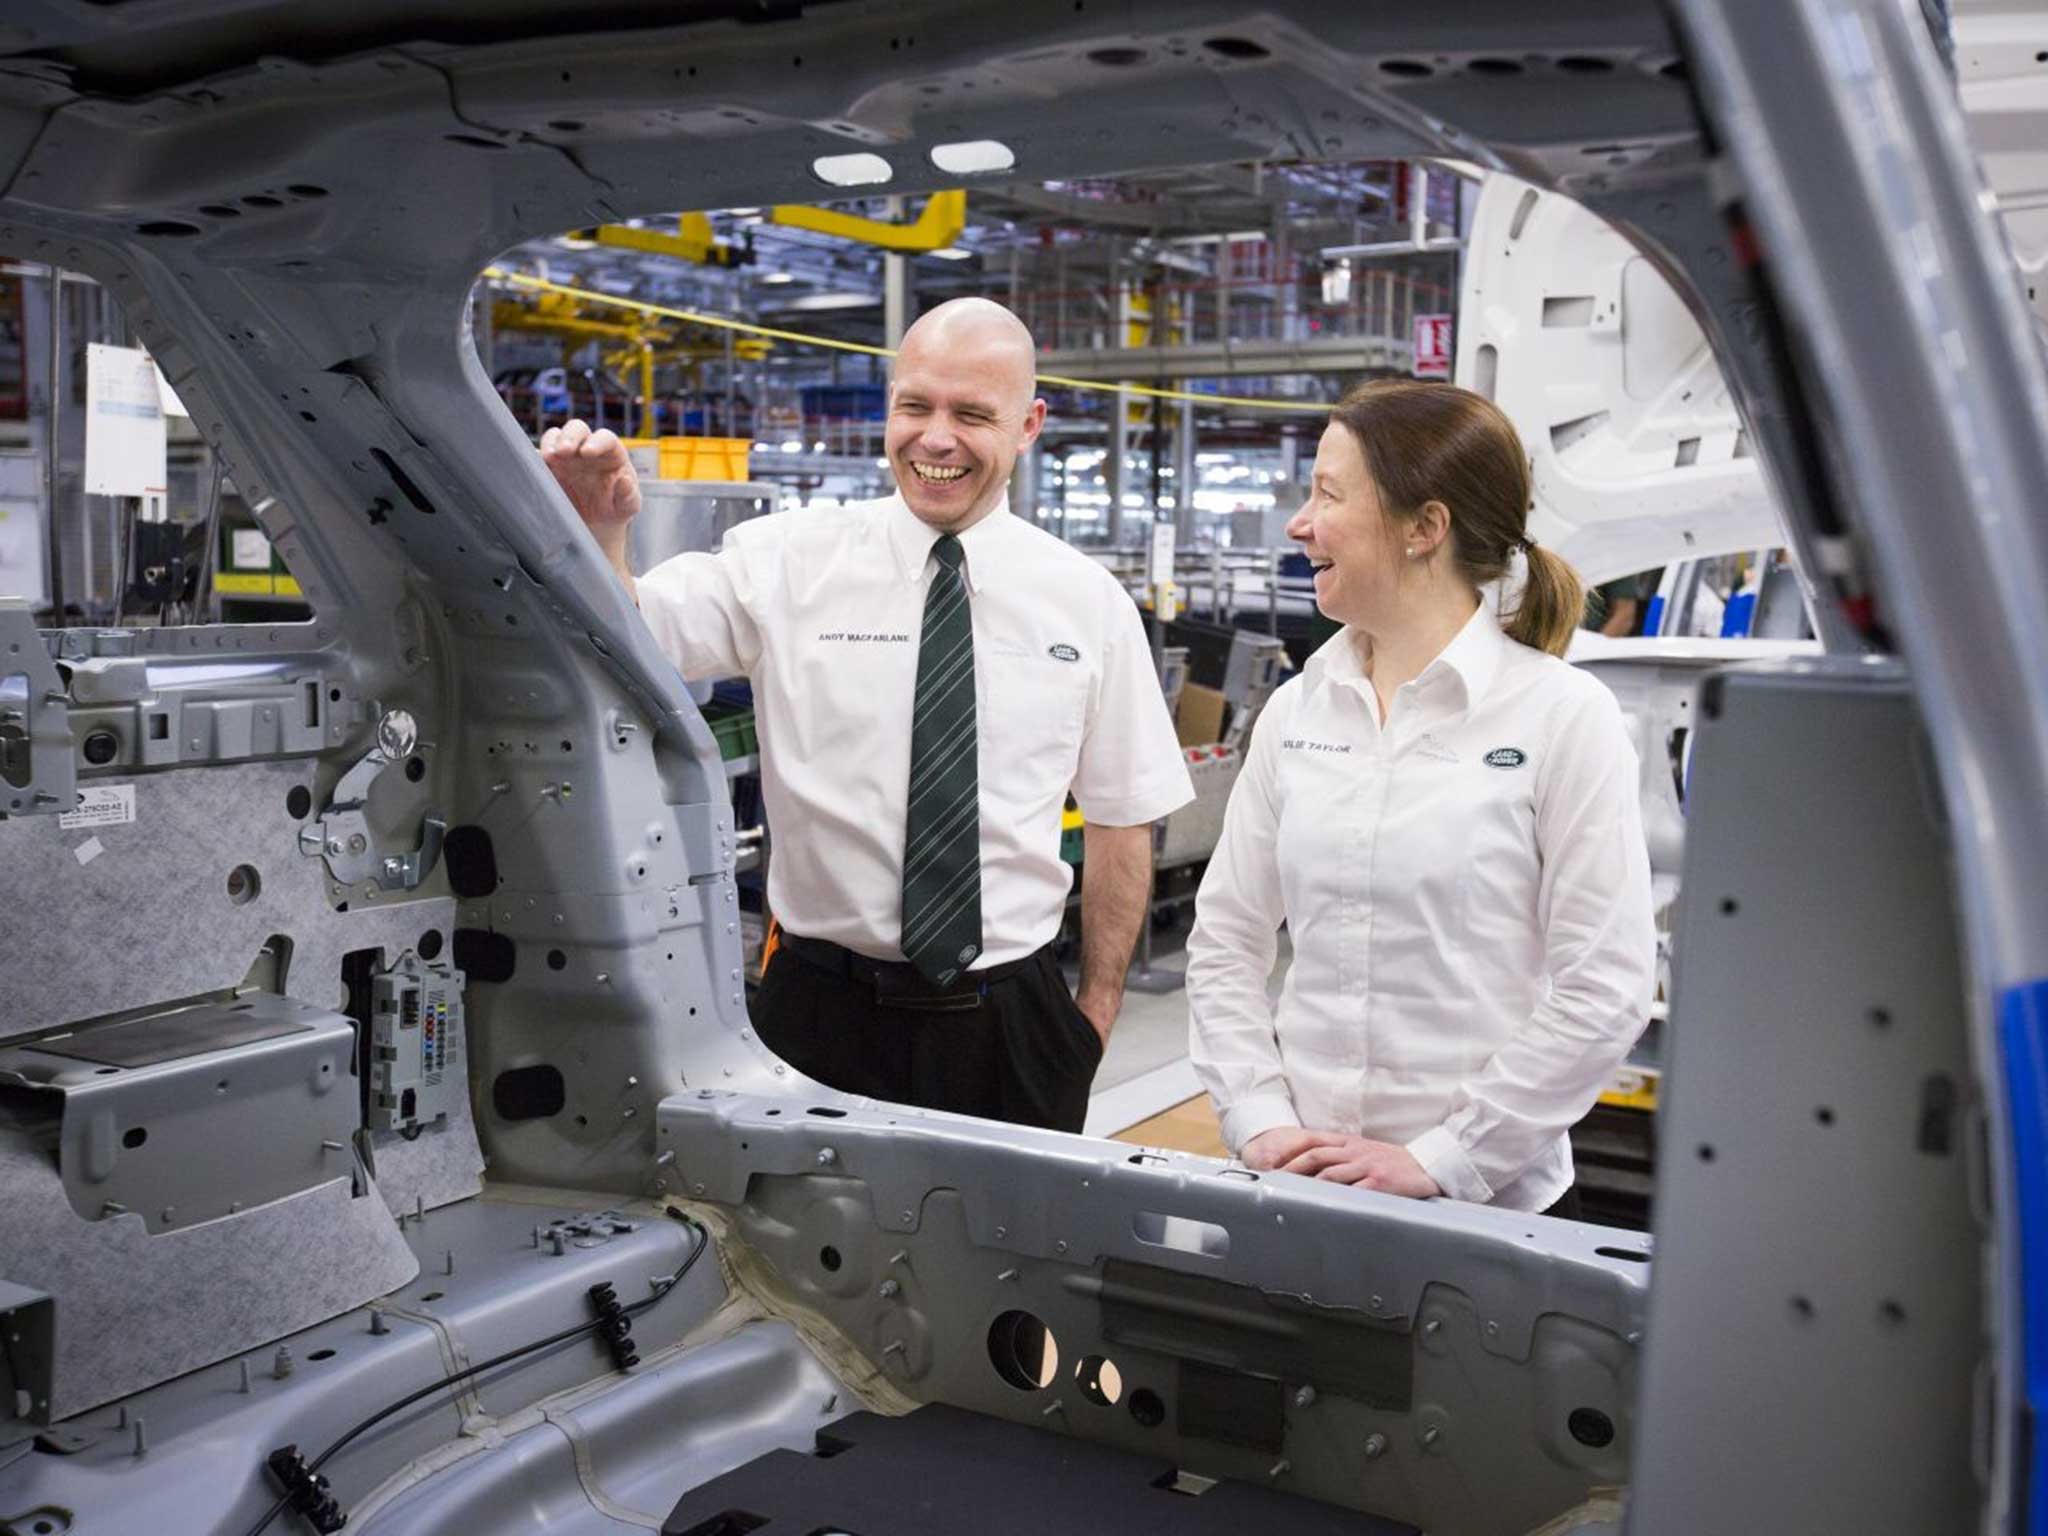 Former soldiers Andy MacFarlane and Julie Taylor, who now work at the Jaguar Land Rover plant in Solihull